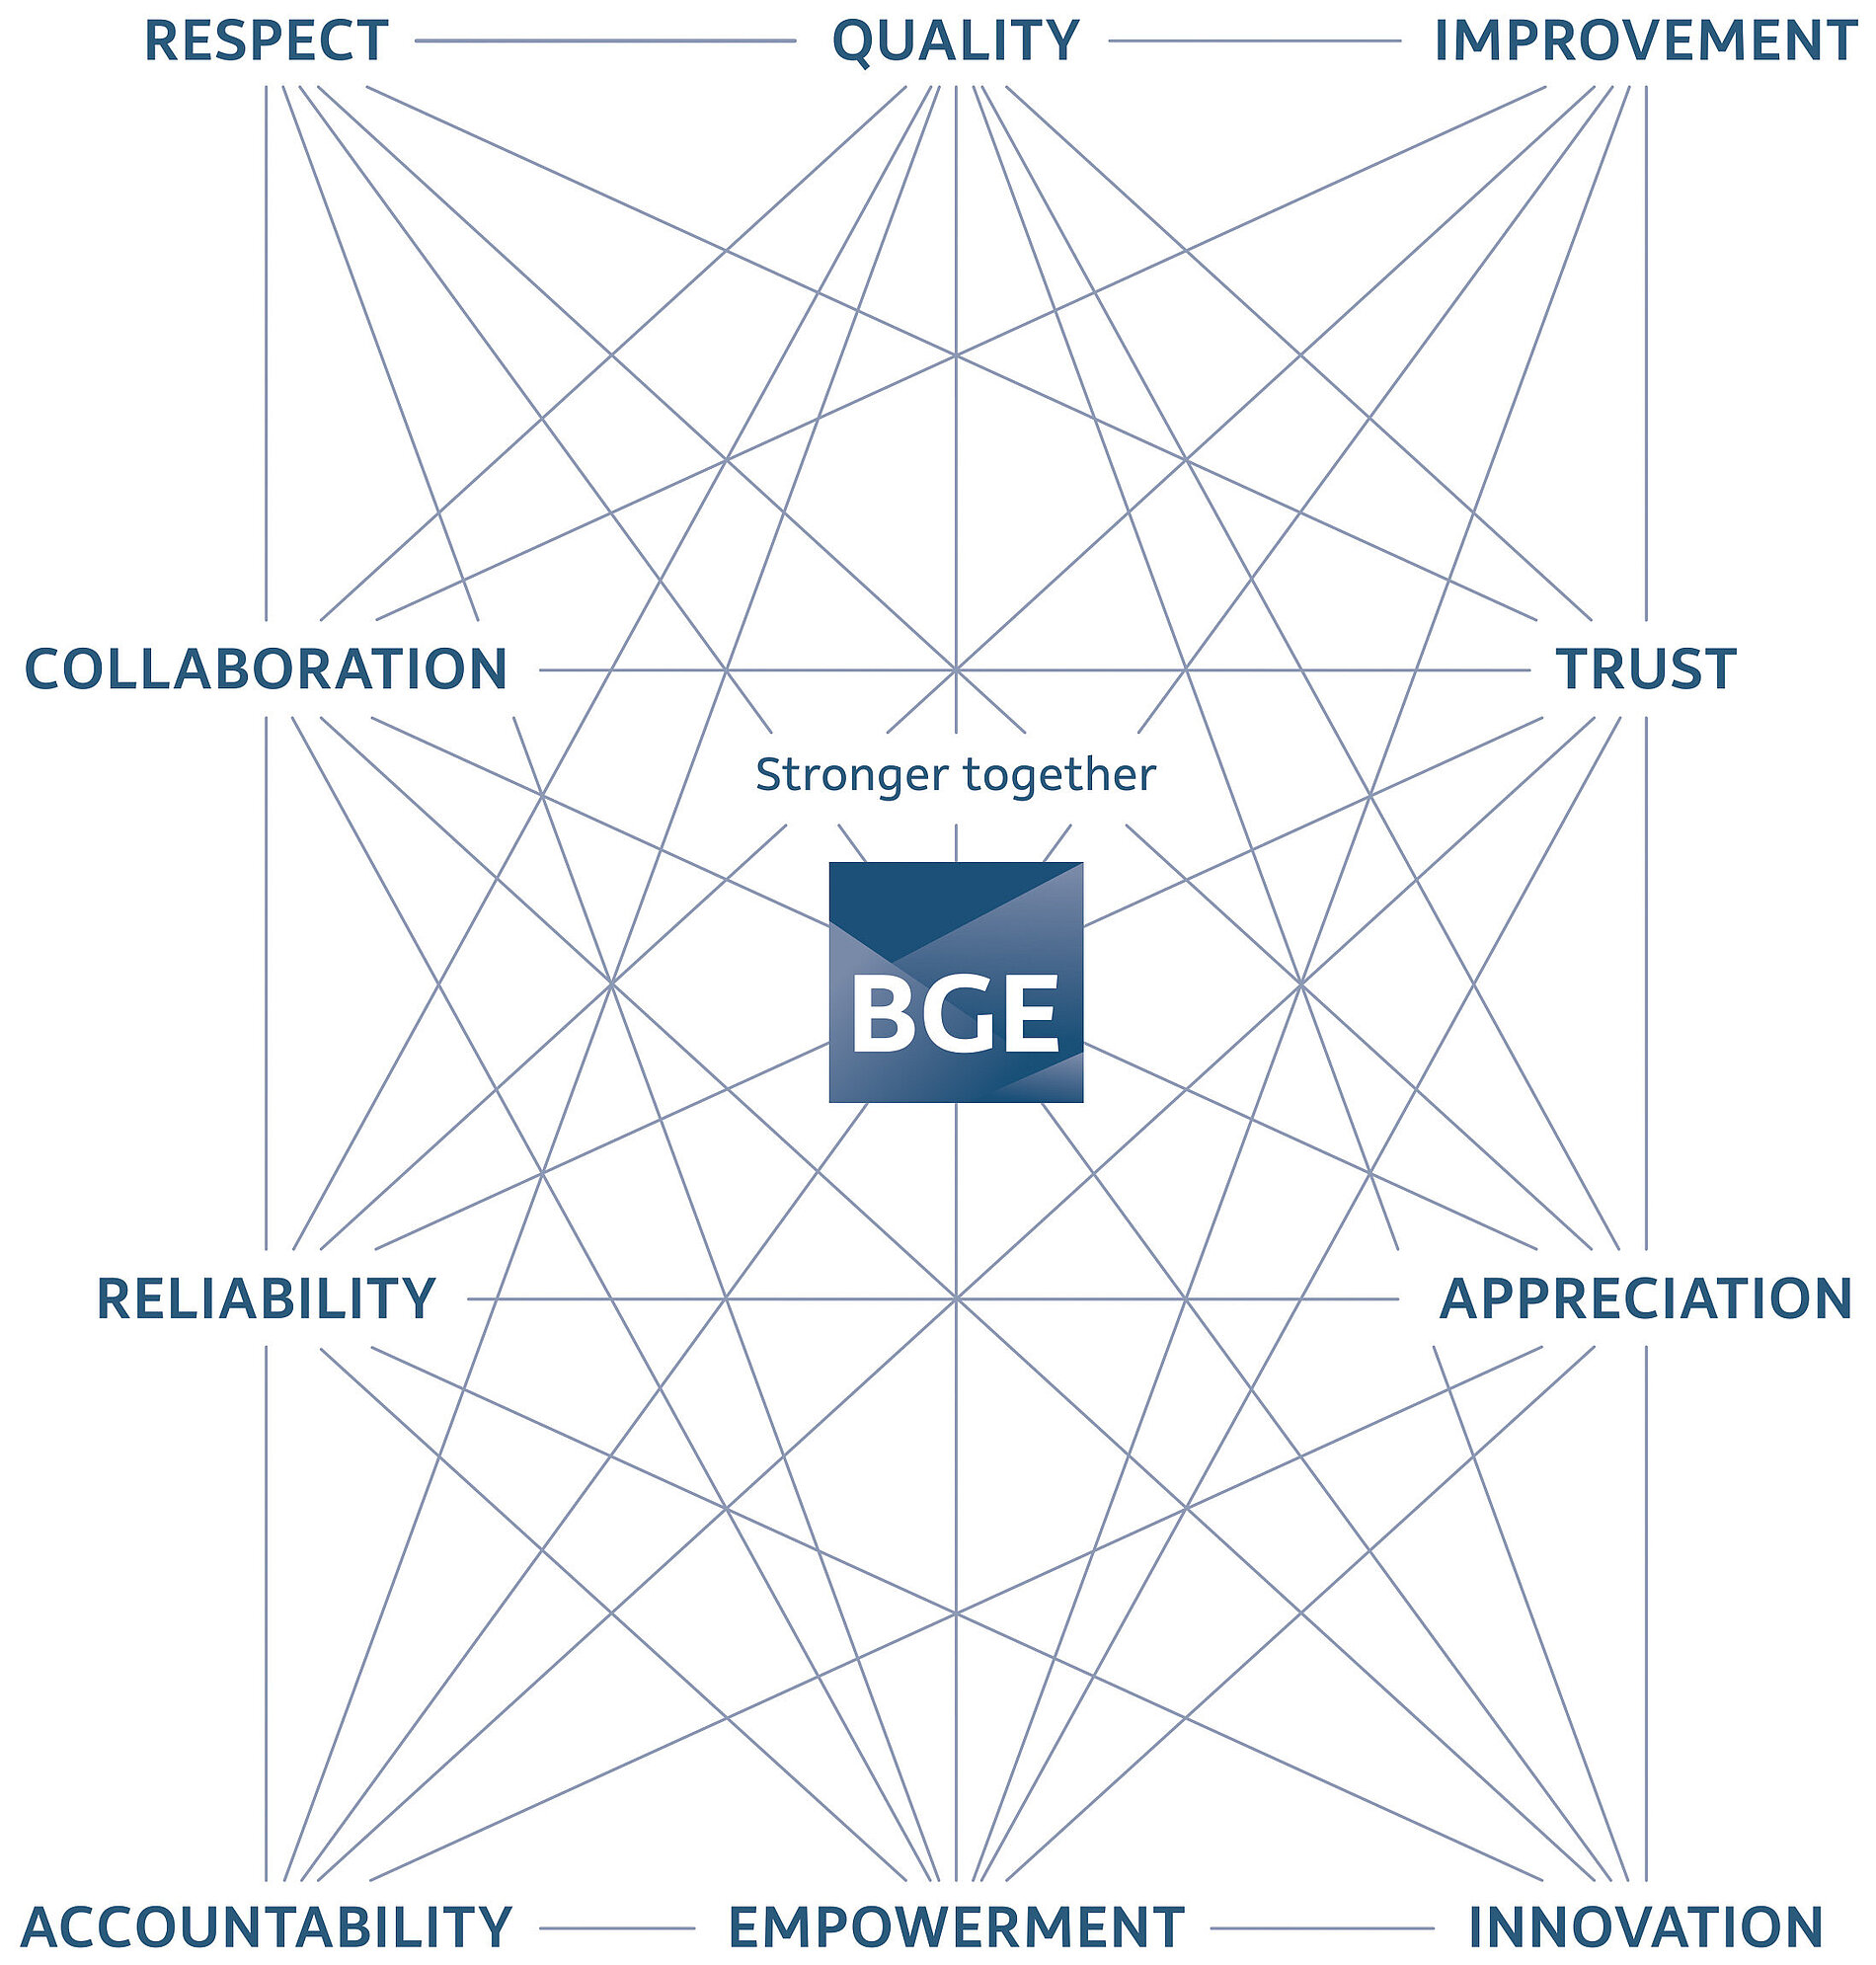 A graphic that visualizes the mission statements which are respect, quality, improvement, collaboration, trust, reliability, appreciation, accountability, empowerment and innovation.